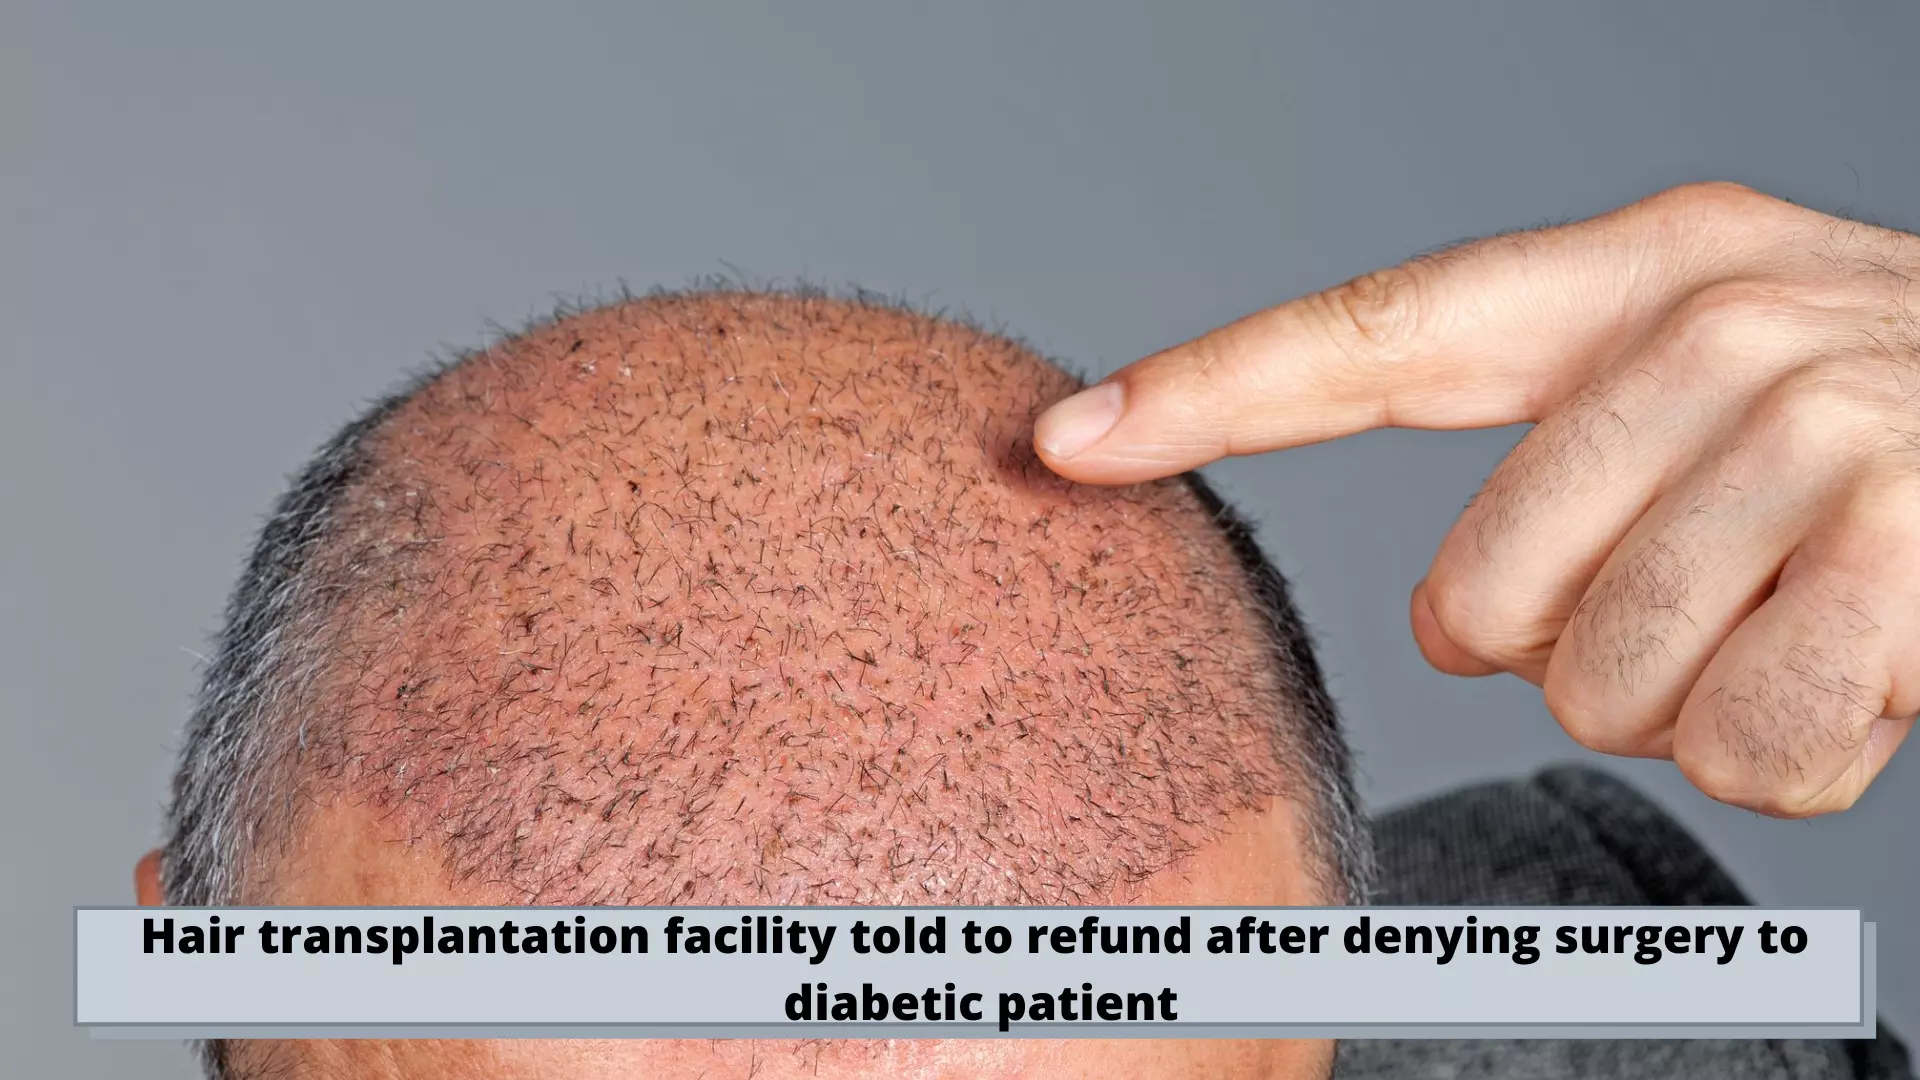 Bengaluru-based Hair Transplantation Facility directed to refund after denying surgery to diabetic patient